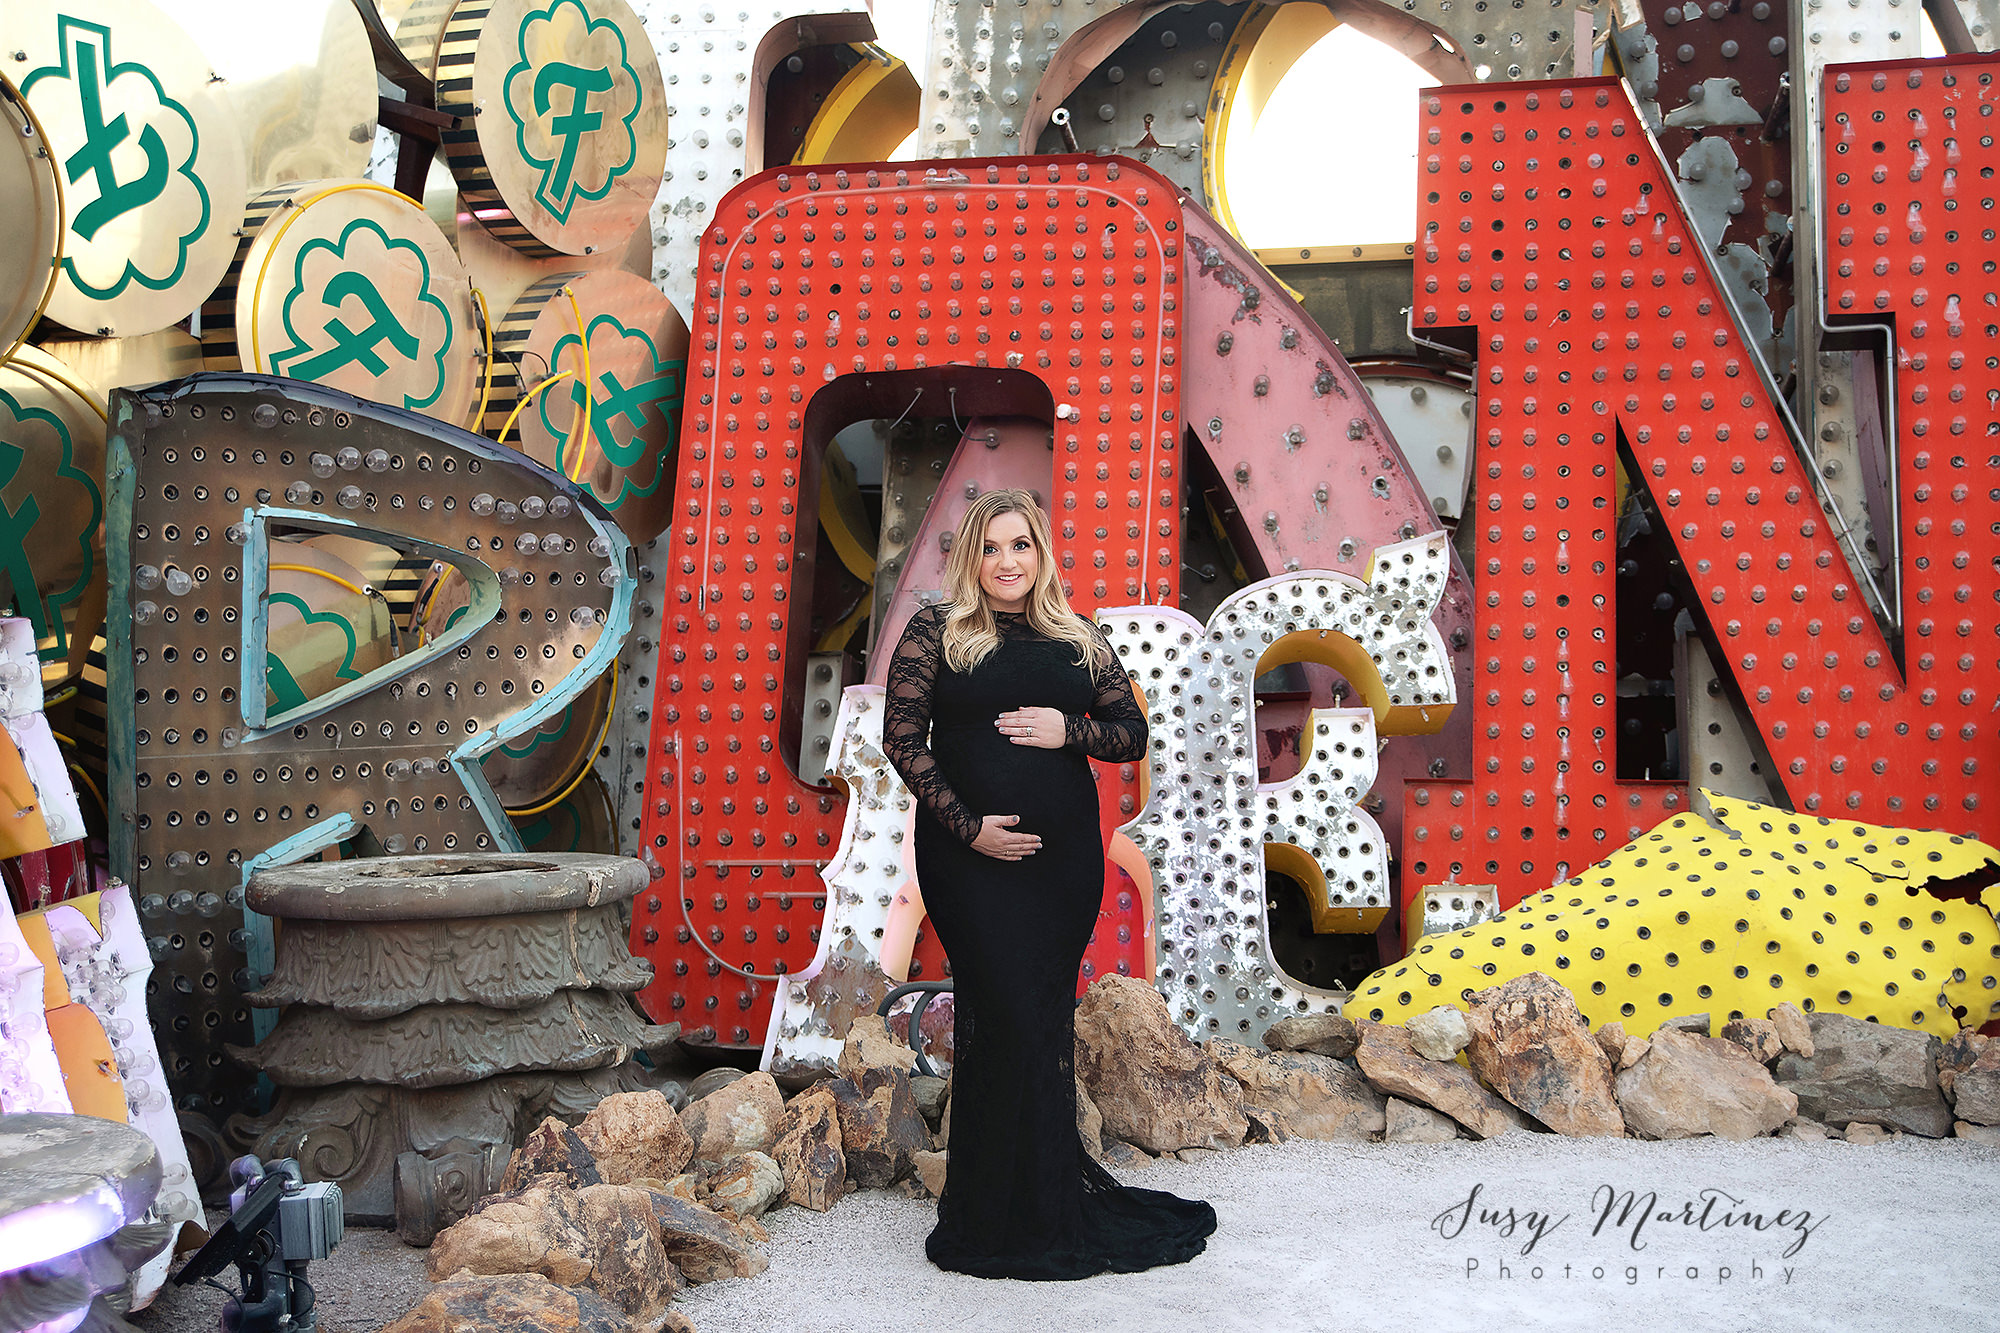 North Gallery maternity session in the Neon Boneyard with Susy Martinez Photography